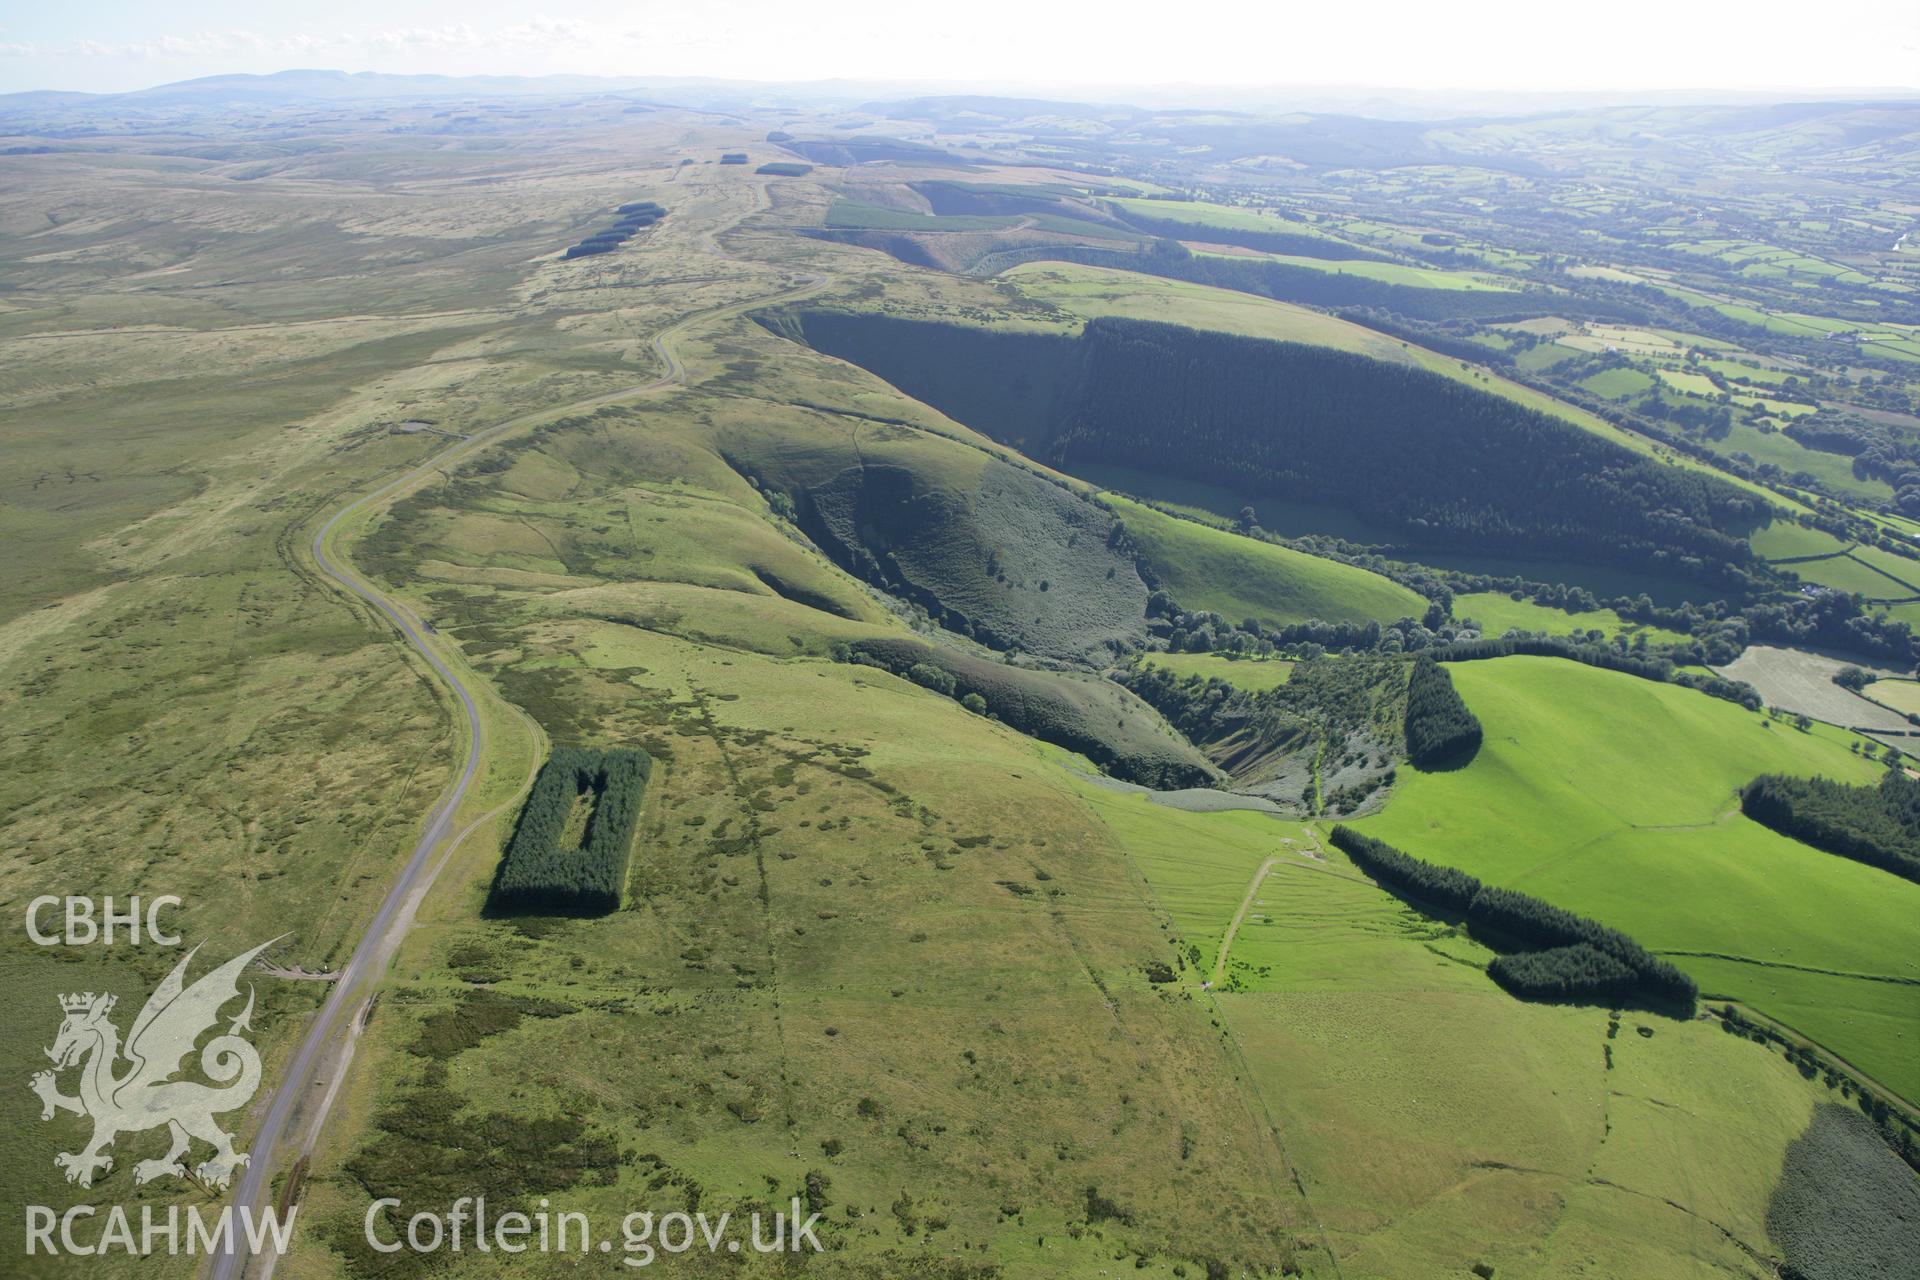 RCAHMW colour oblique aerial photograph of Sennybridge Military Training Area, Mynydd Epynt, showing the northern escarpment from the north-east. Taken on 08 August 2007 by Toby Driver